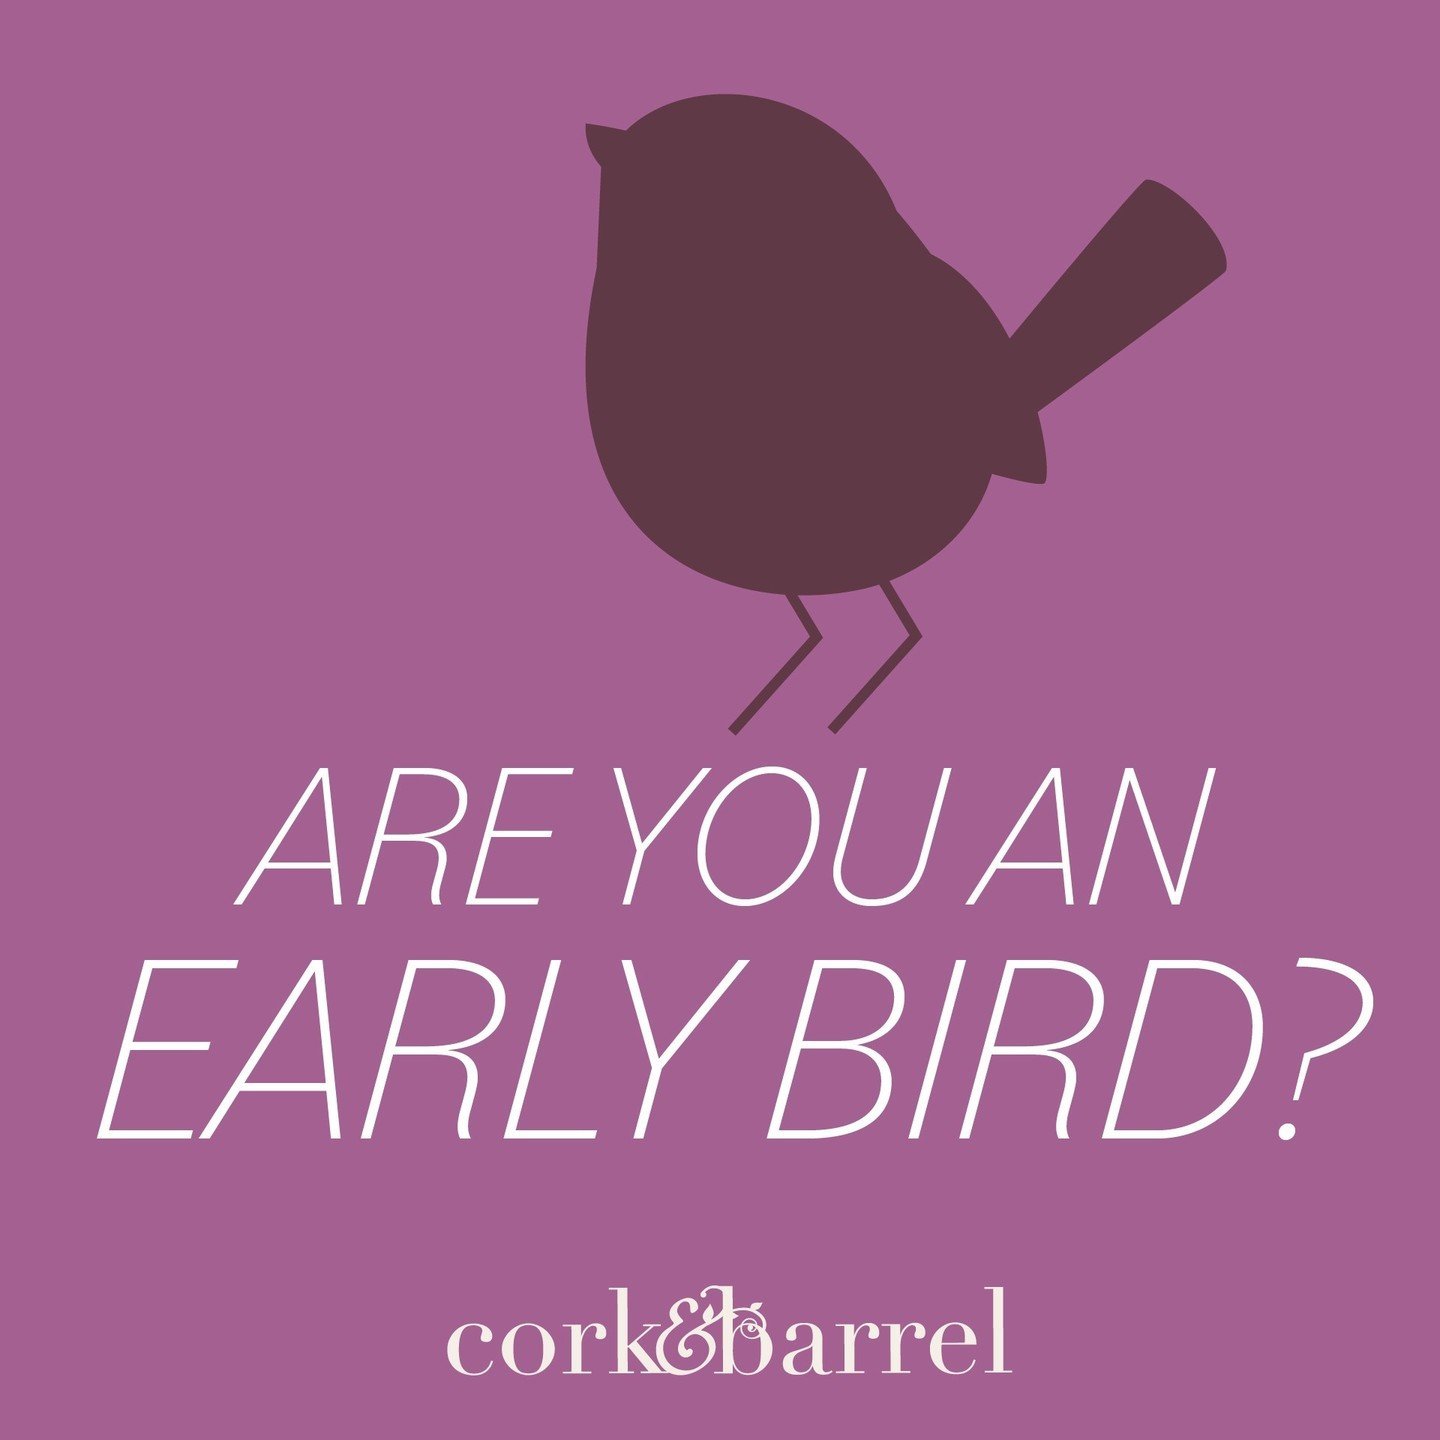 Are you an Early Bird? Then take note!⁠
⁠
You have just 15 DAYS LEFT to get Sip tickets at our special early bird price! Right now, Sip tickets are just $100 each. On May 1, tickets increase to $125!⁠
⁠
What's so special about Sip?⁠
⁠
It's just the s